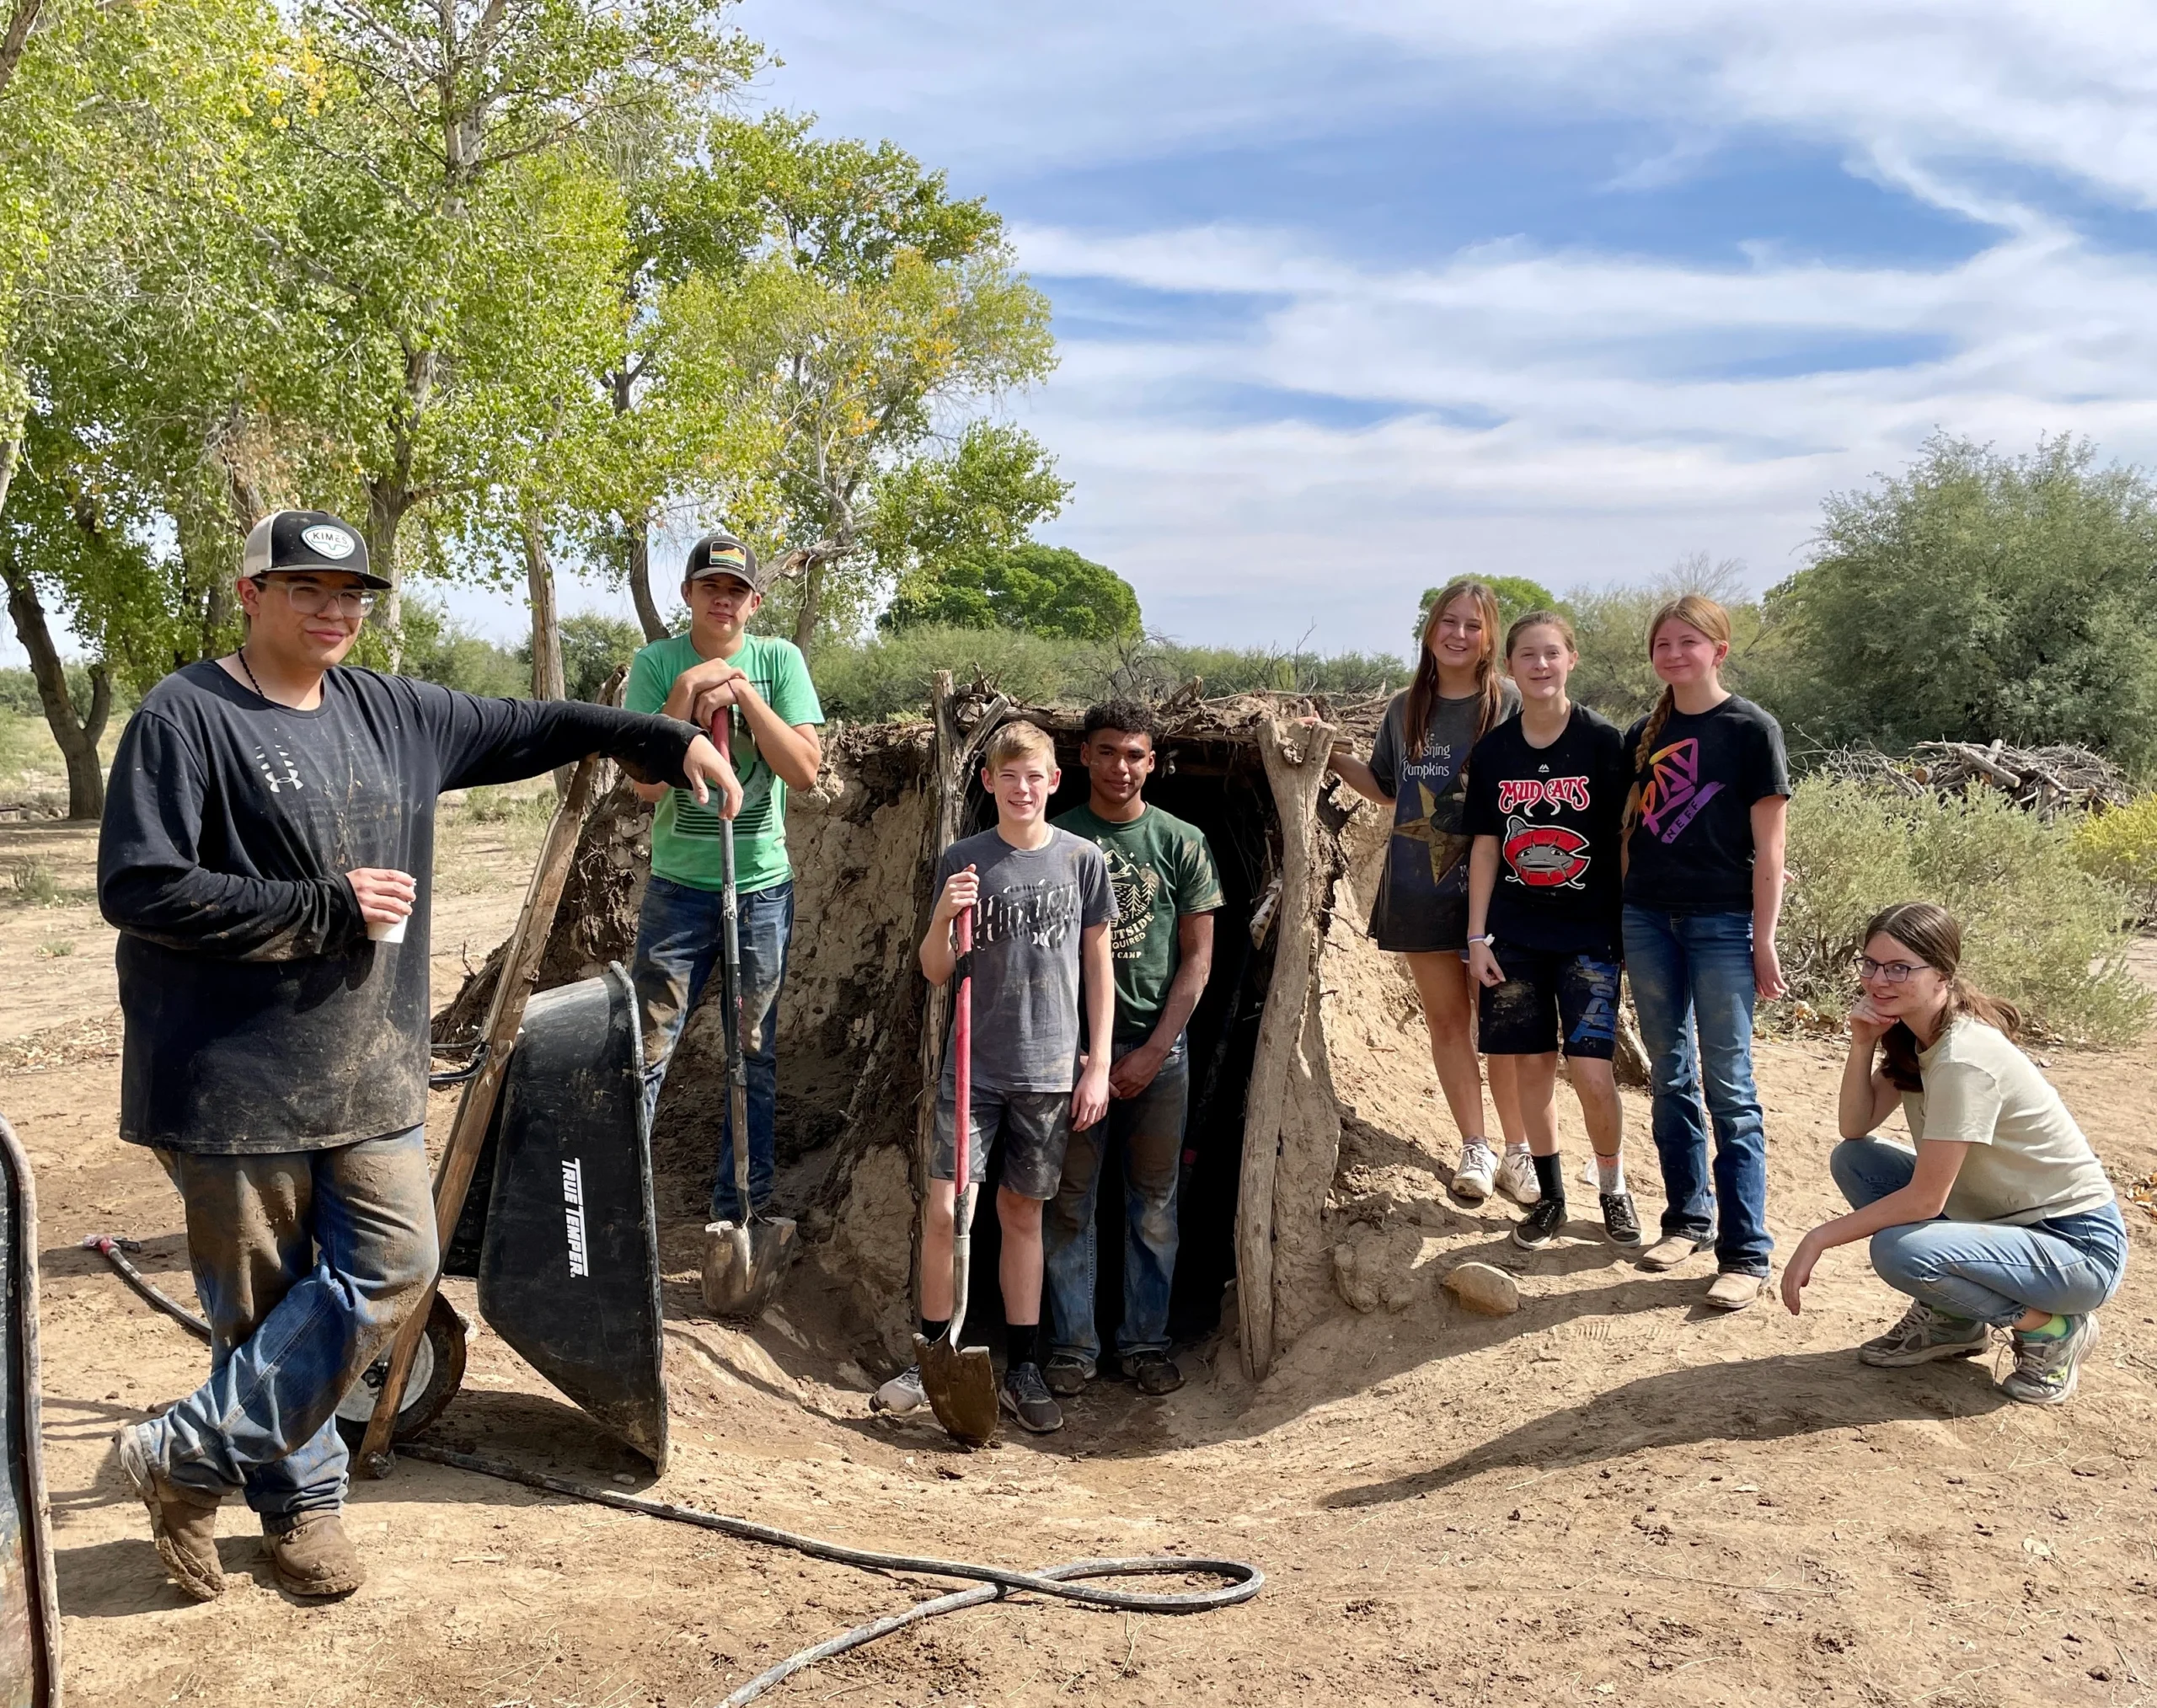 Pima High School National Honor Society students complete service project at EAC’s Discovery Park